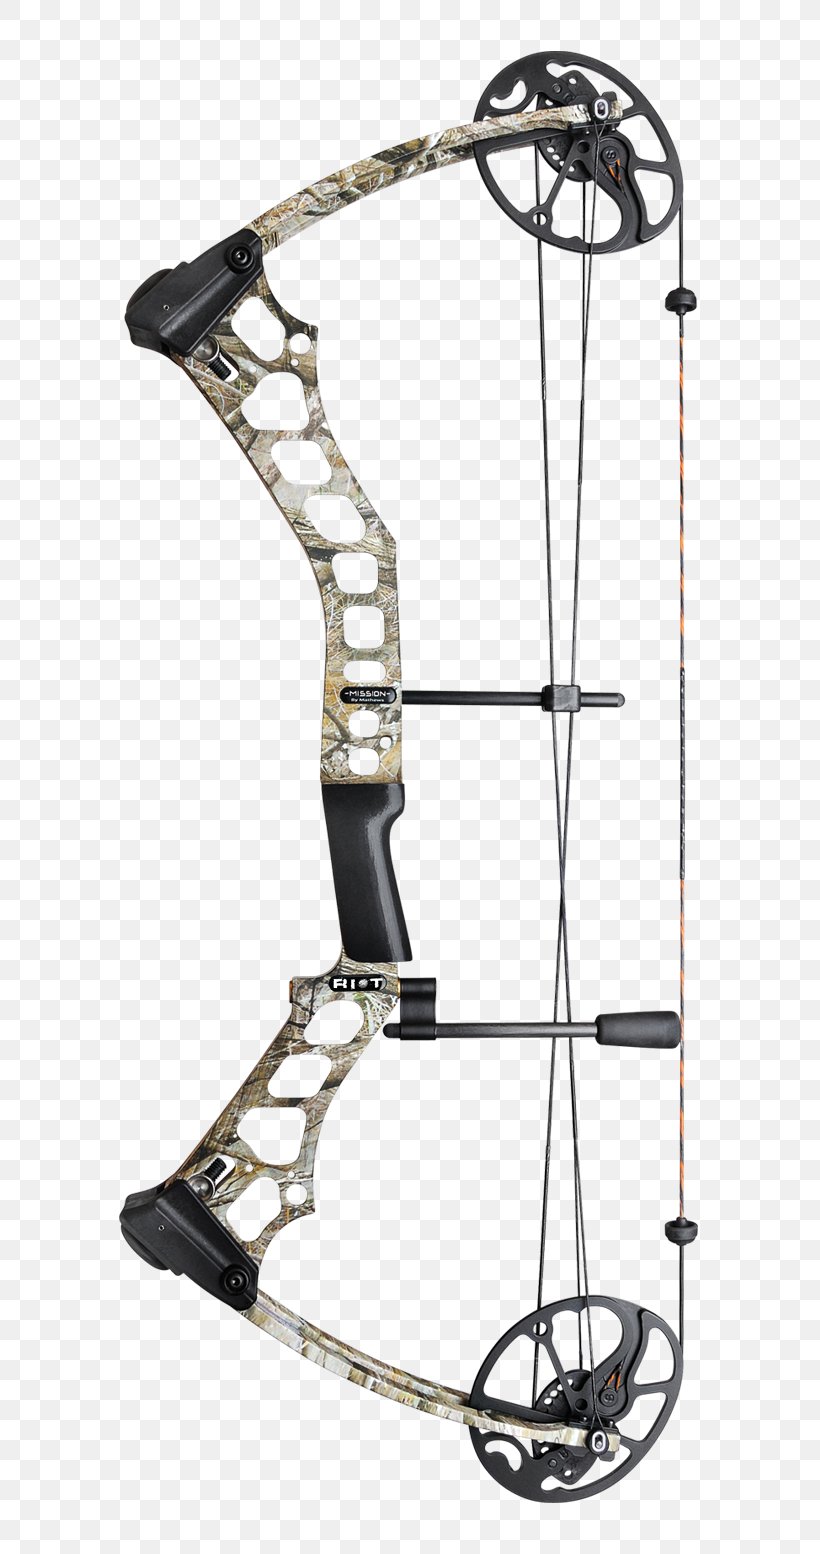 Compound Bows Bow And Arrow Archery Bowhunting, PNG, 812x1554px, Compound Bows, Archery, Ballistics, Bass And Bucks Inc, Bit Download Free